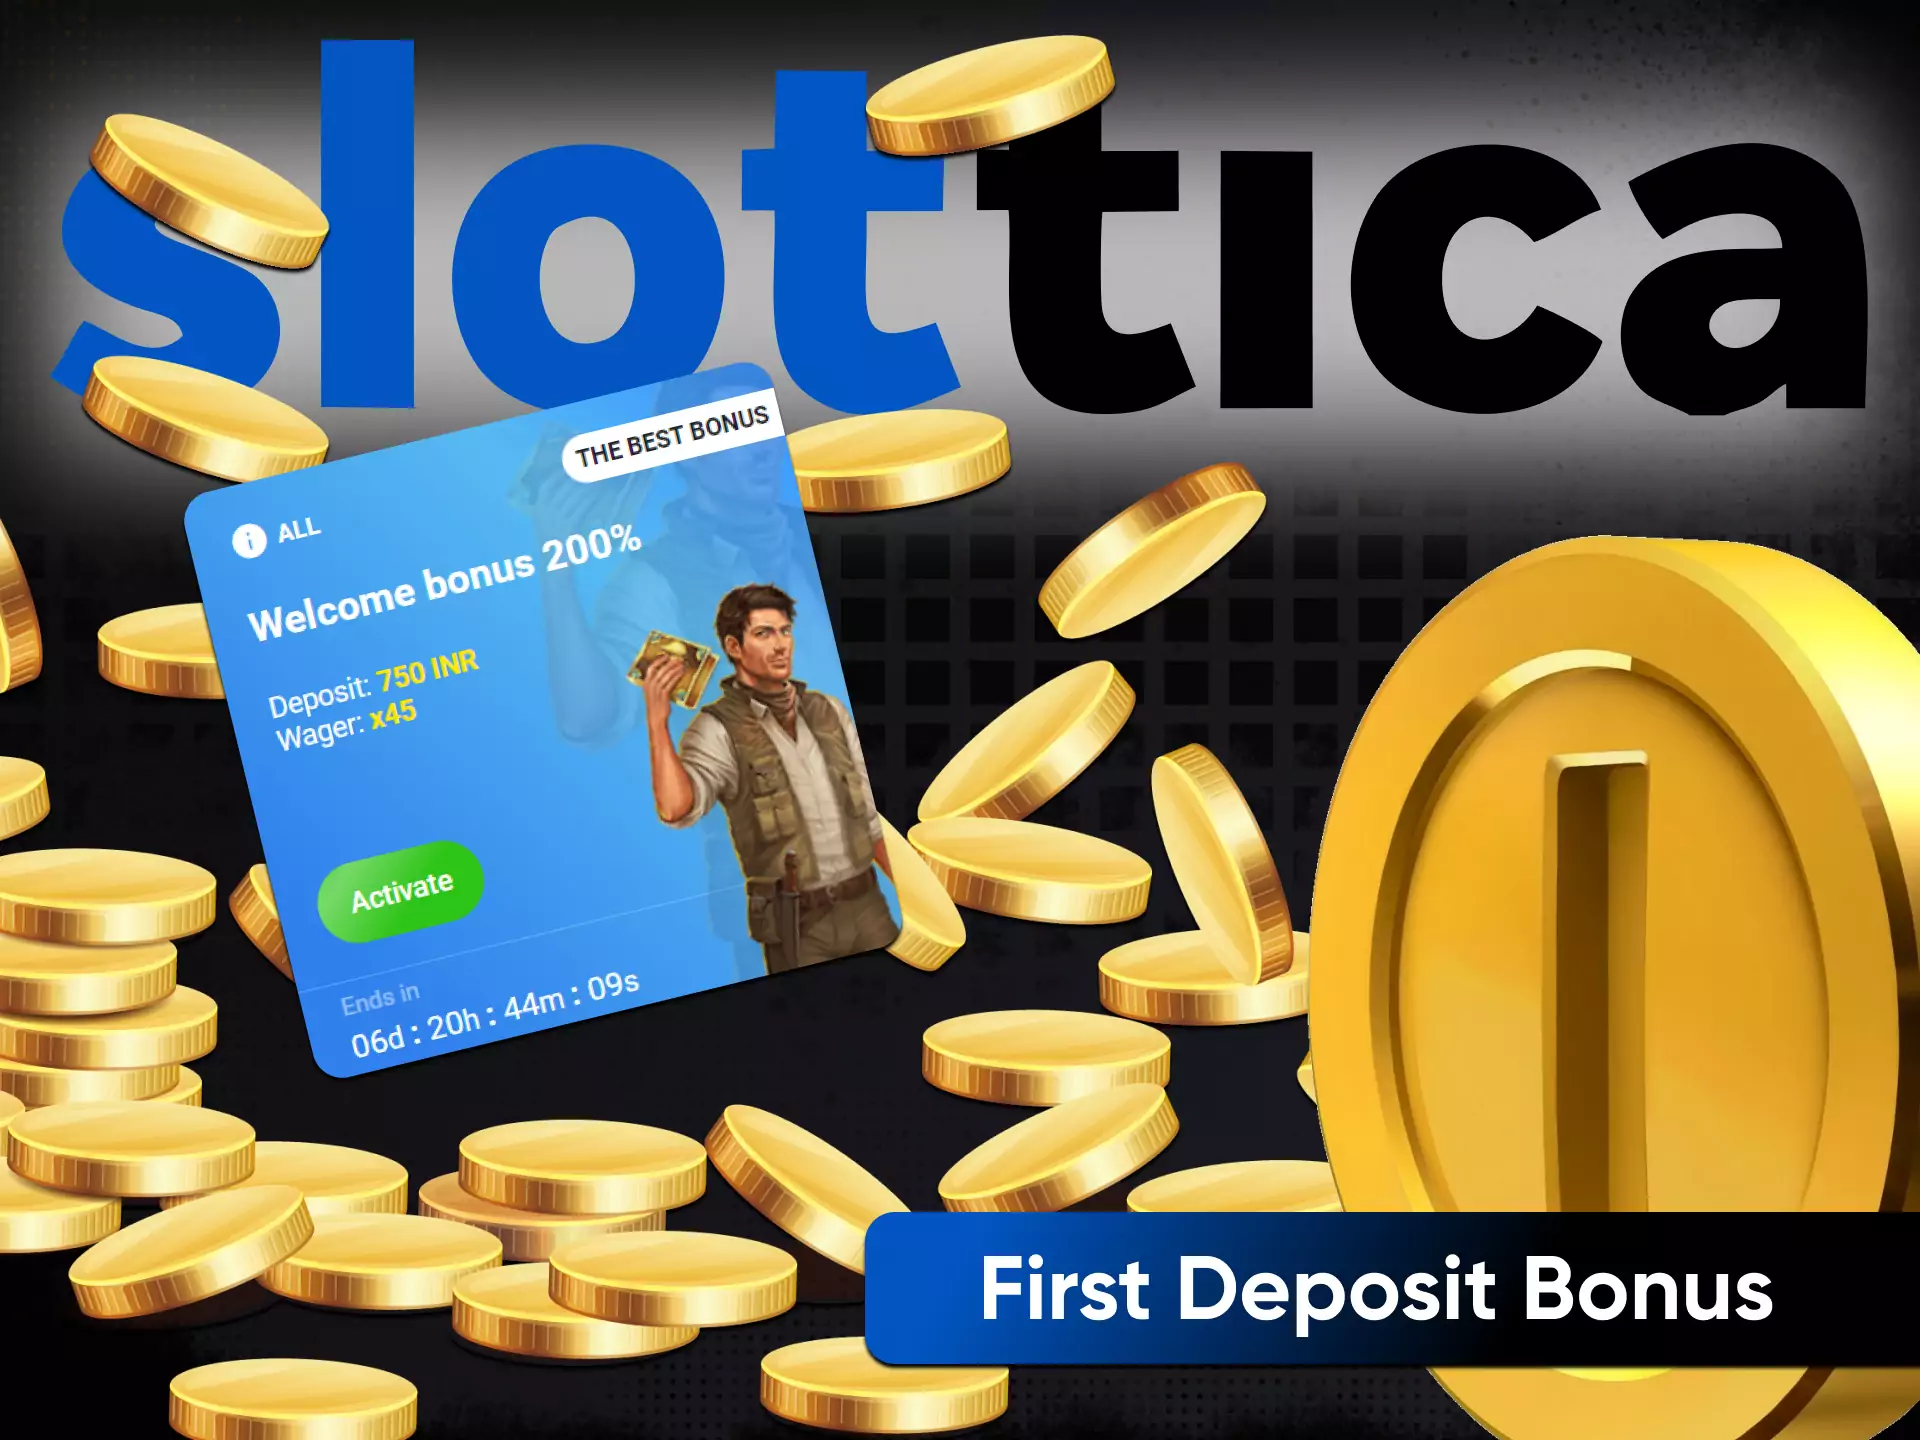 Newcomers get a welcome bonus from Slottica after they make the first deposit.